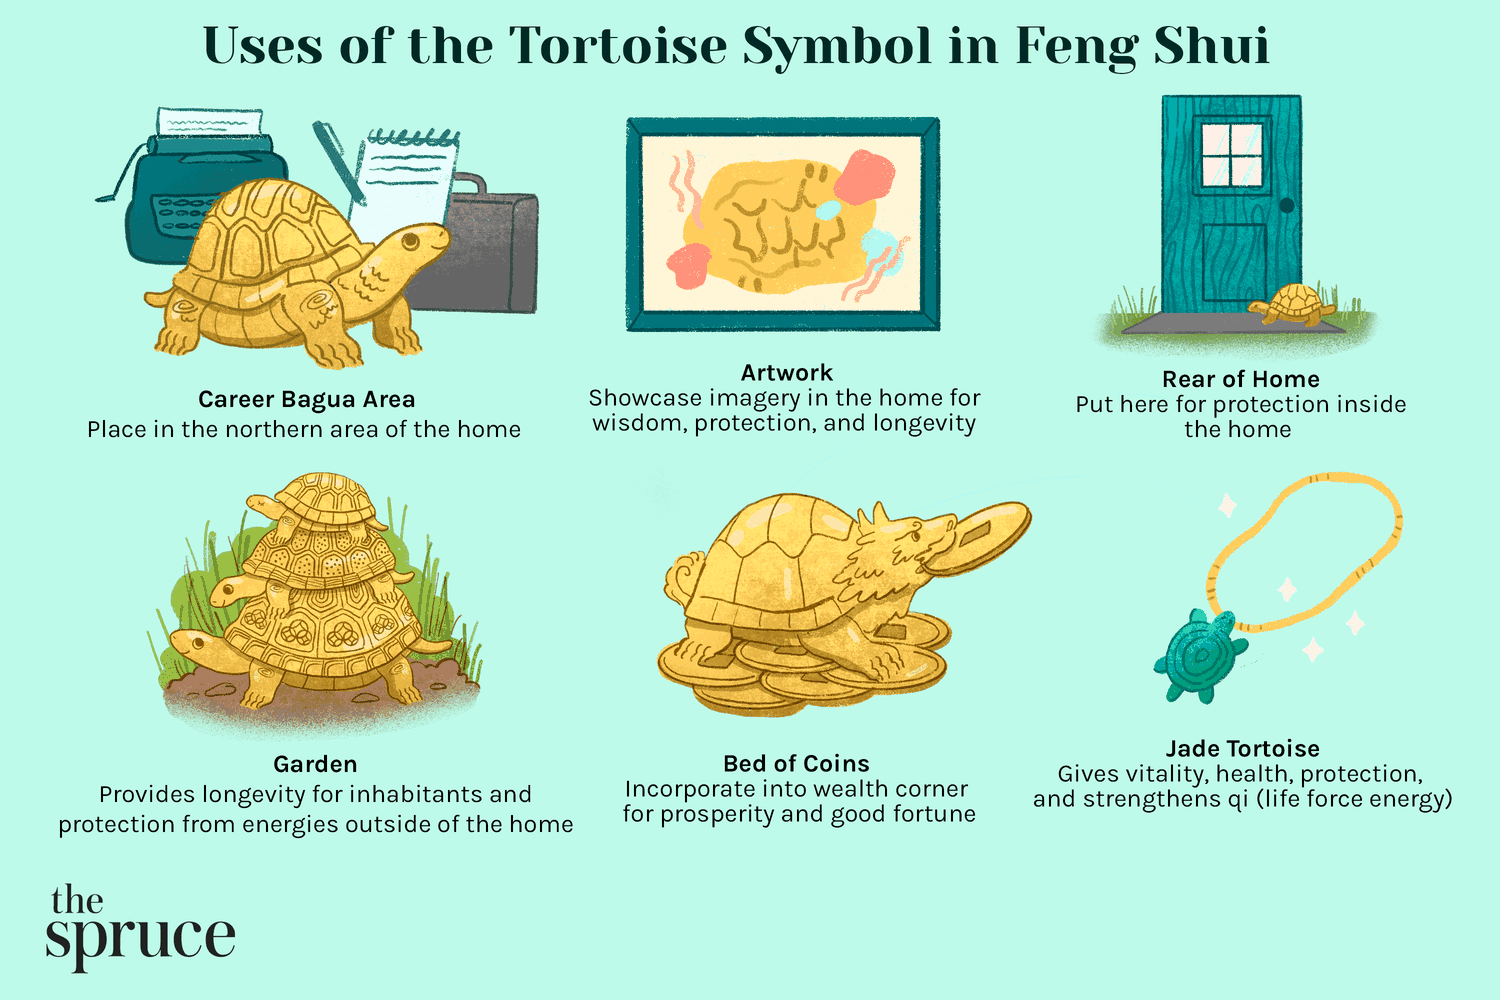 Uses of the Tortoise Symbol in Feng Shui